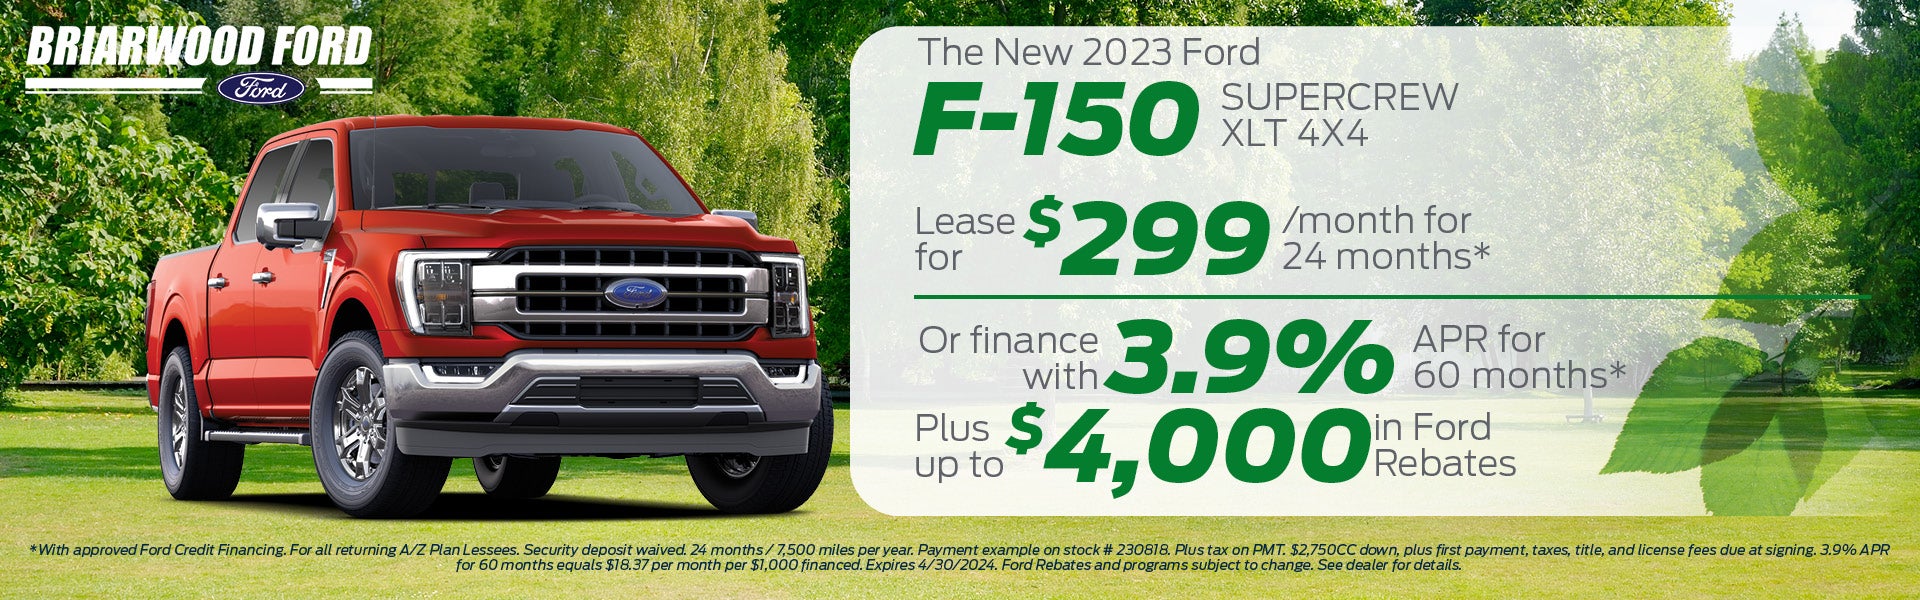 2023 Ford F-150 Lease or Finance Offer